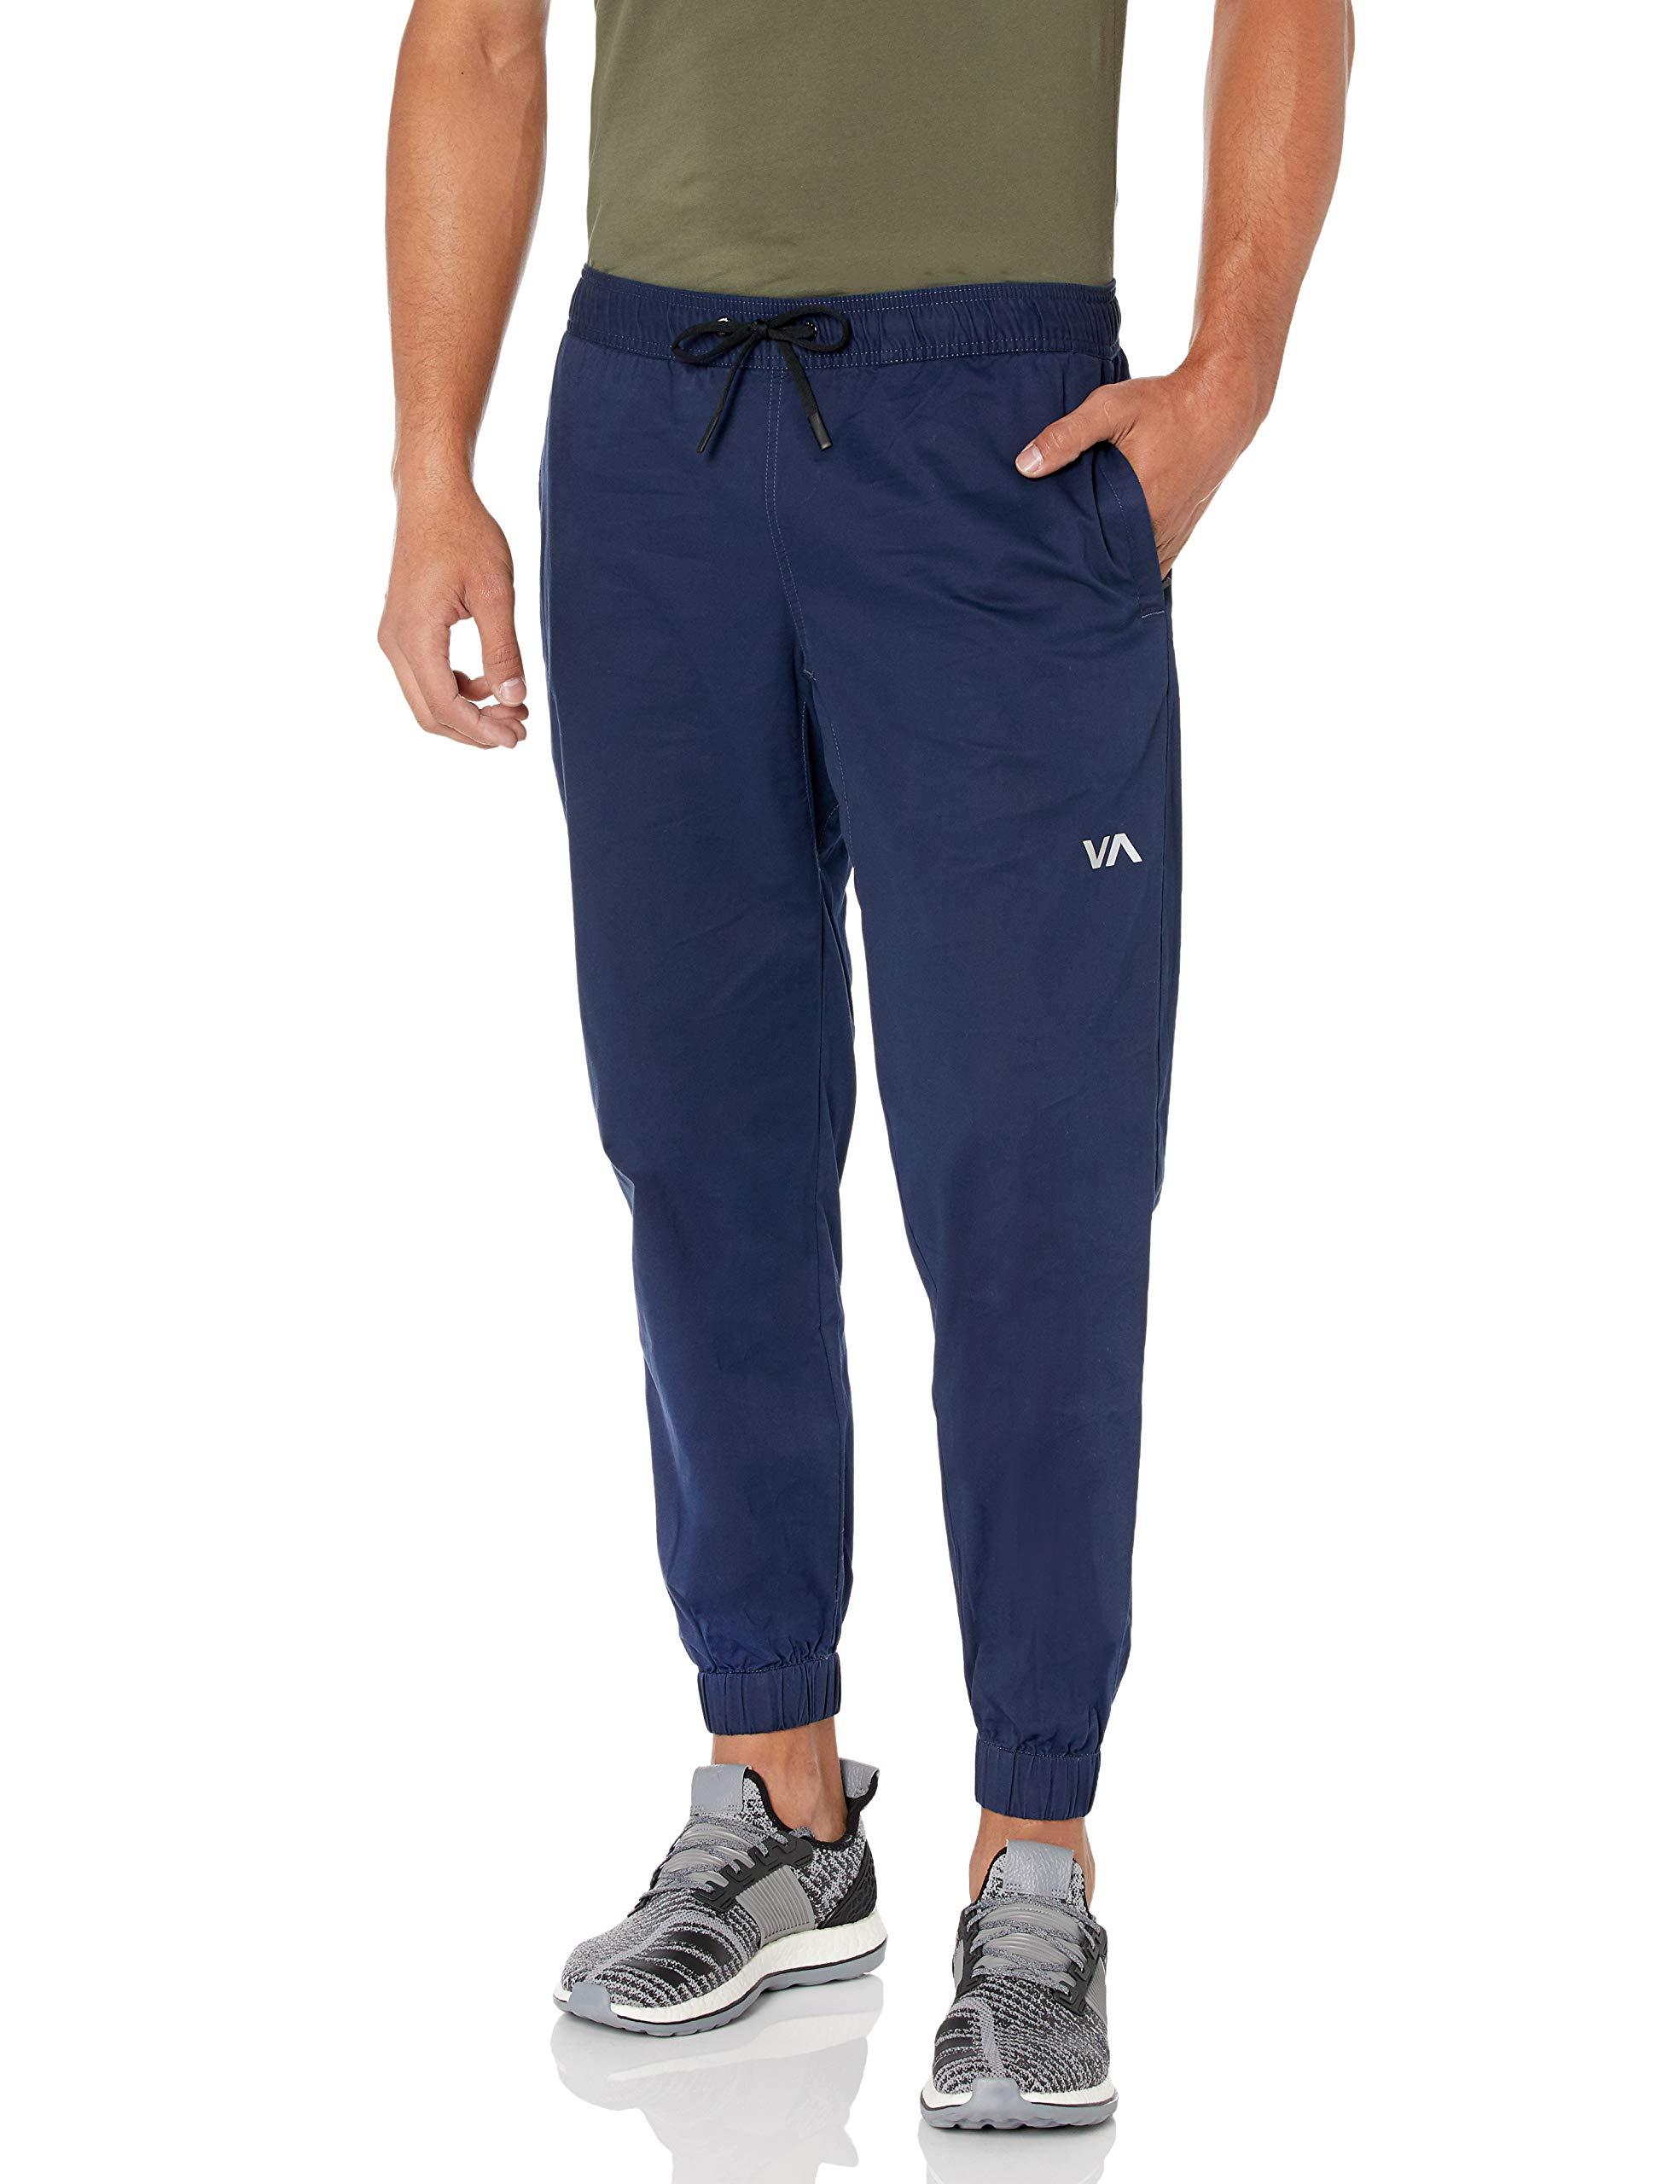 RVCA Spectrum Cuffed Pant in Midnight (Black) for Men - Save 24% - Lyst